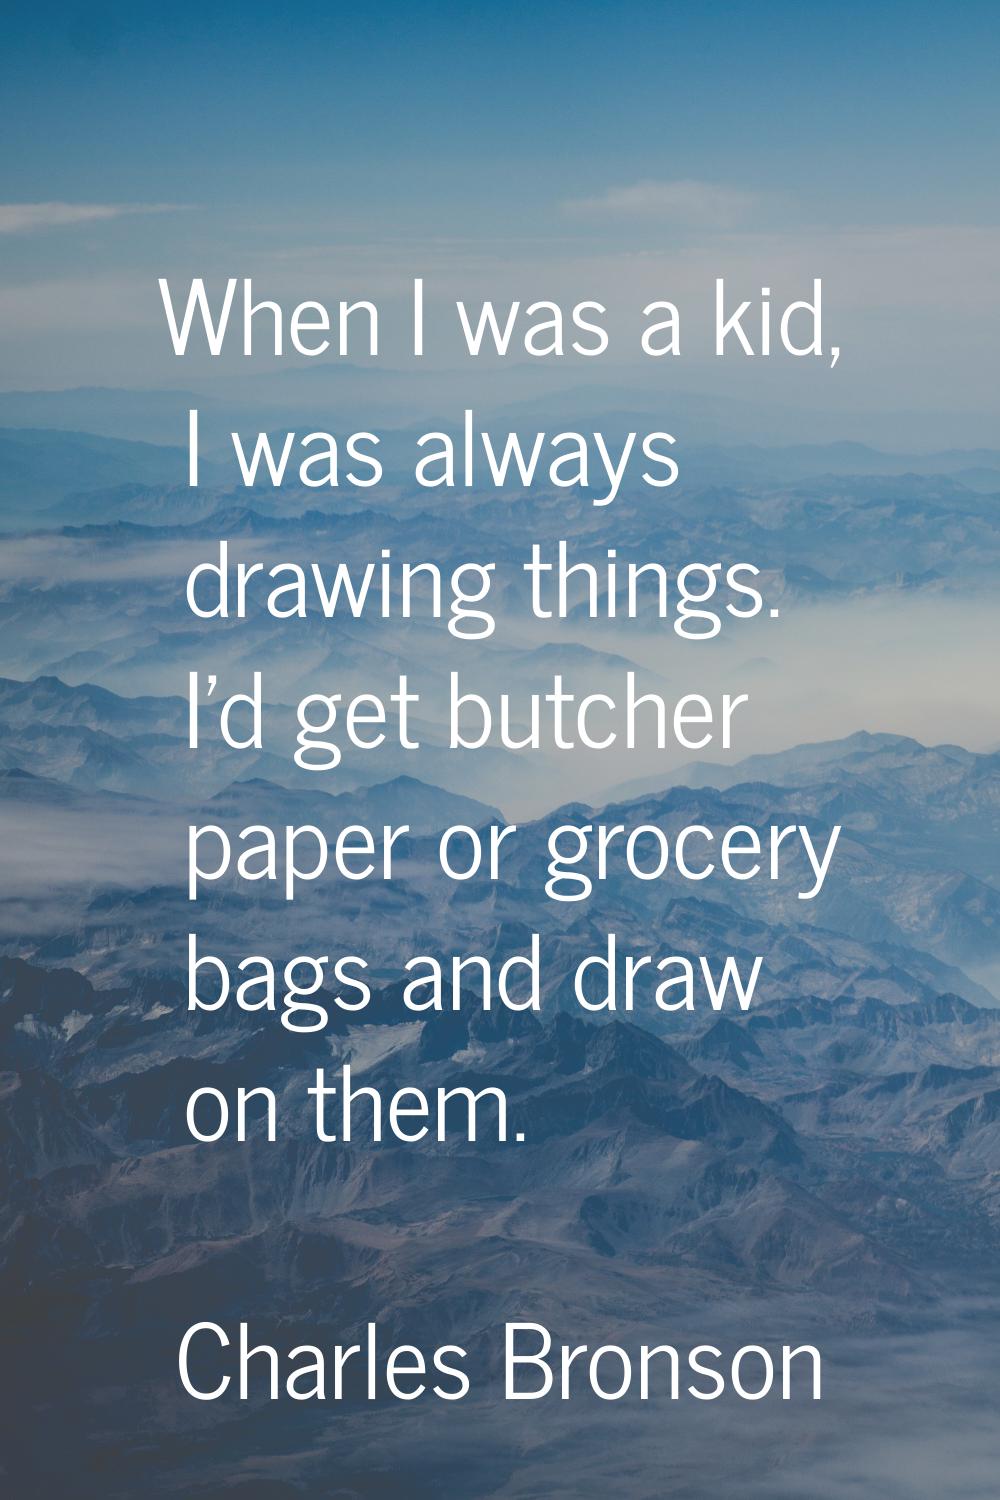 When I was a kid, I was always drawing things. I'd get butcher paper or grocery bags and draw on th